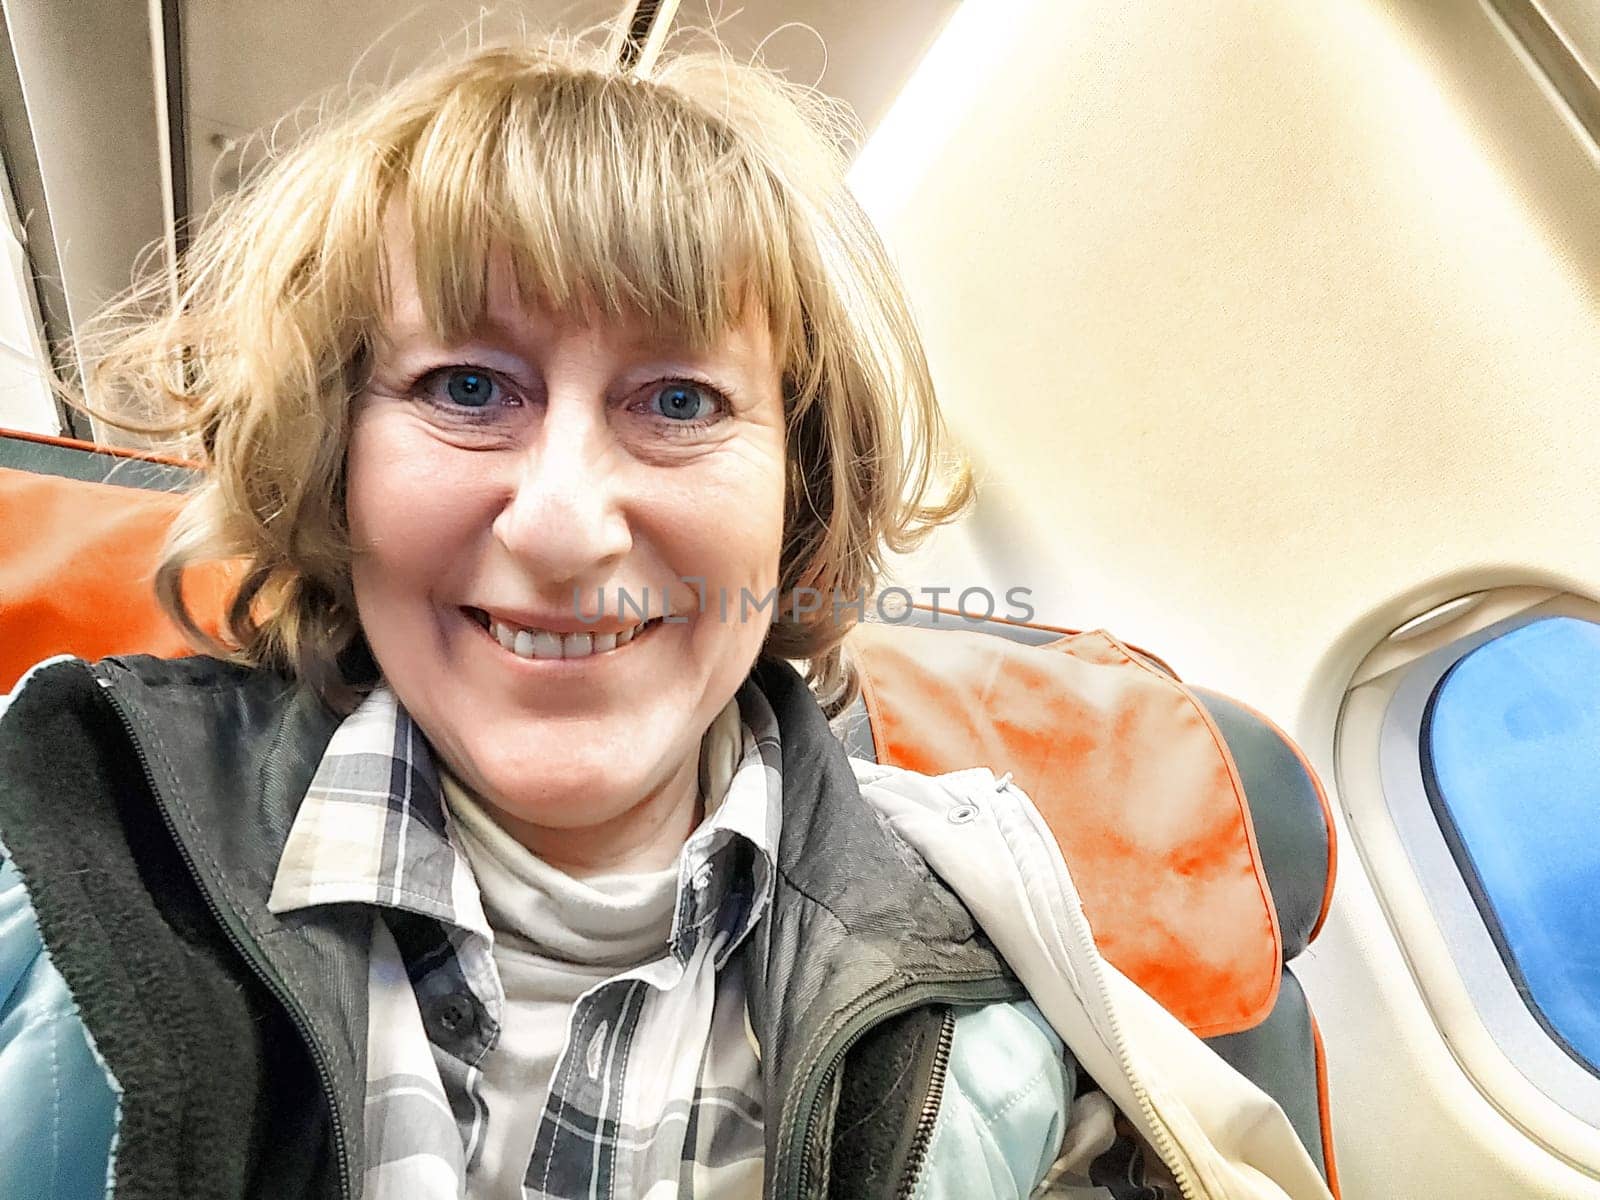 A middle-aged woman takes a selfie on a plane. Portrait of a girl. Smiling Woman on Airplane by keleny